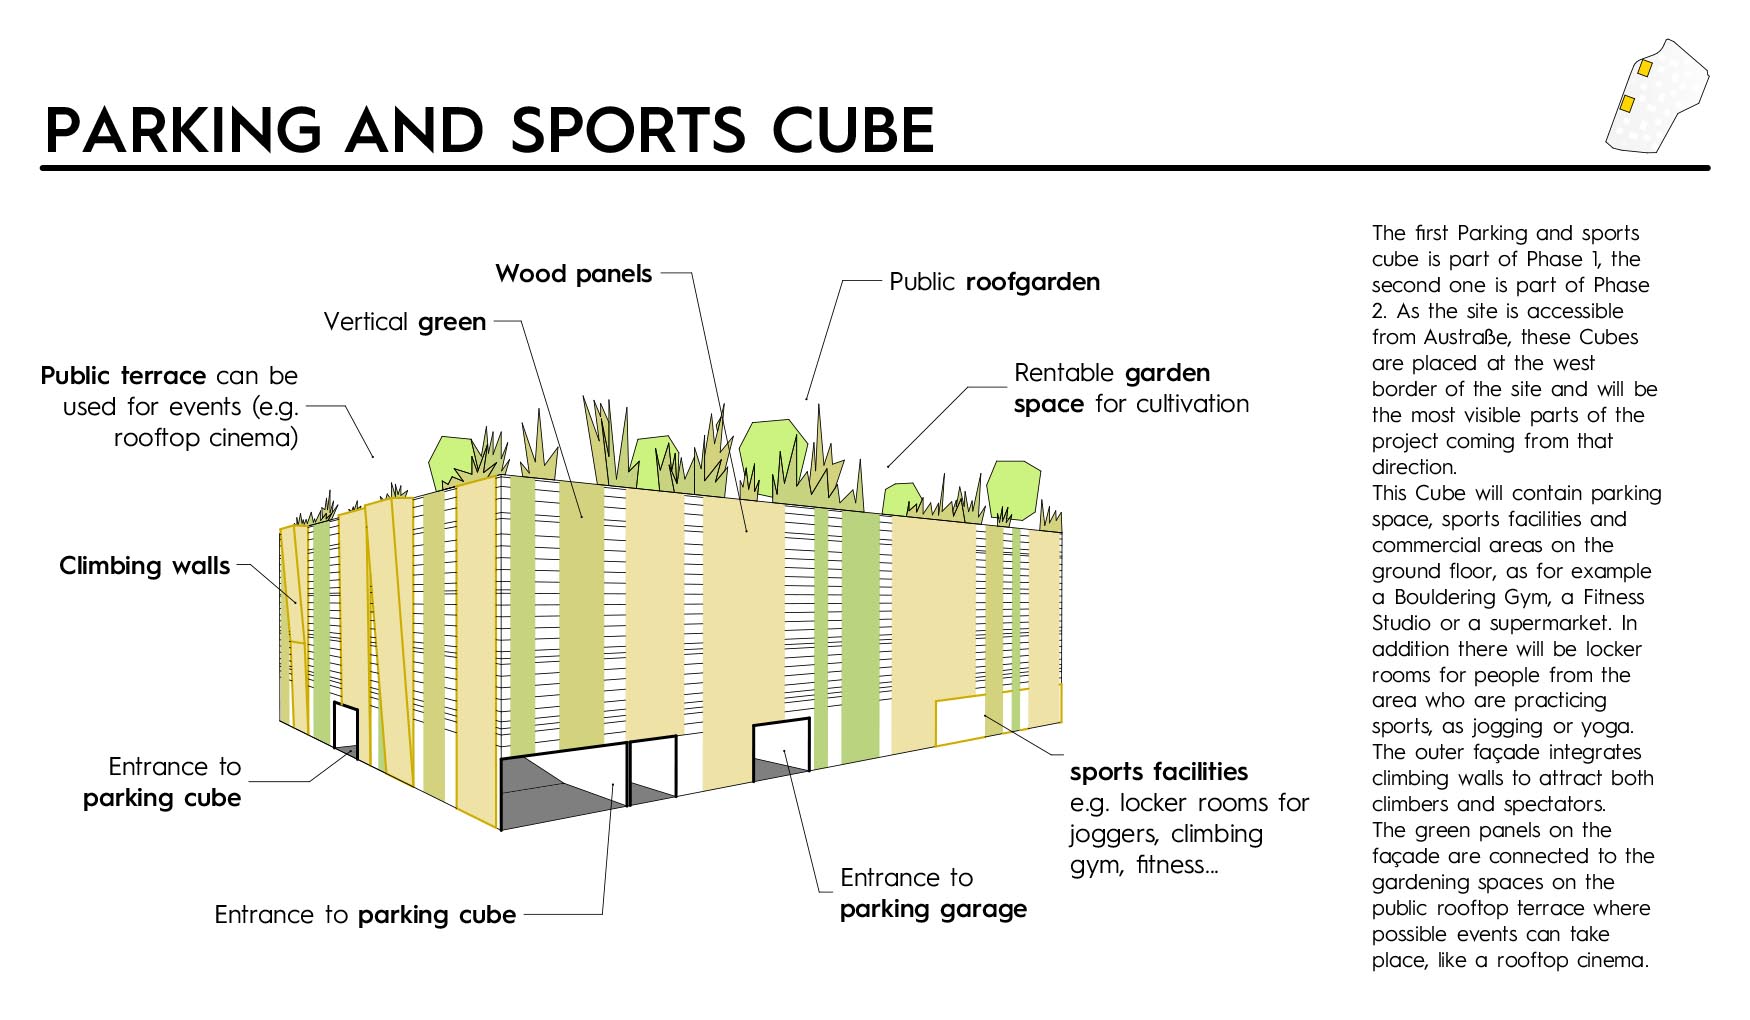 cy architecture_Wettbewerb Europan 13_parking sports cube